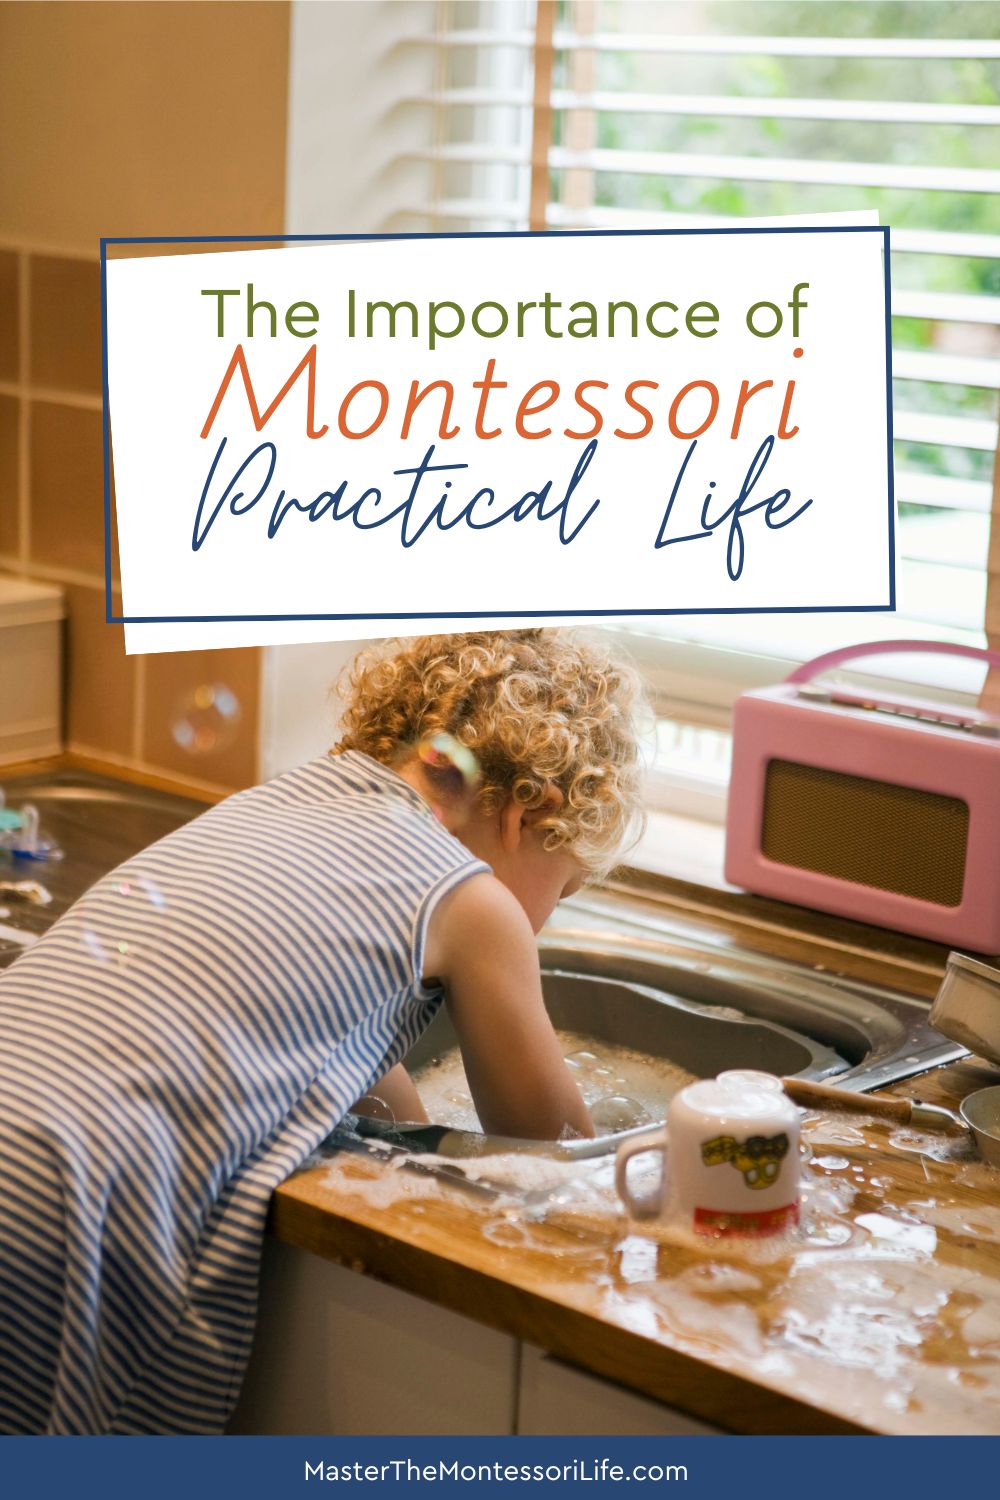 The Importance of Montessori Practical Life